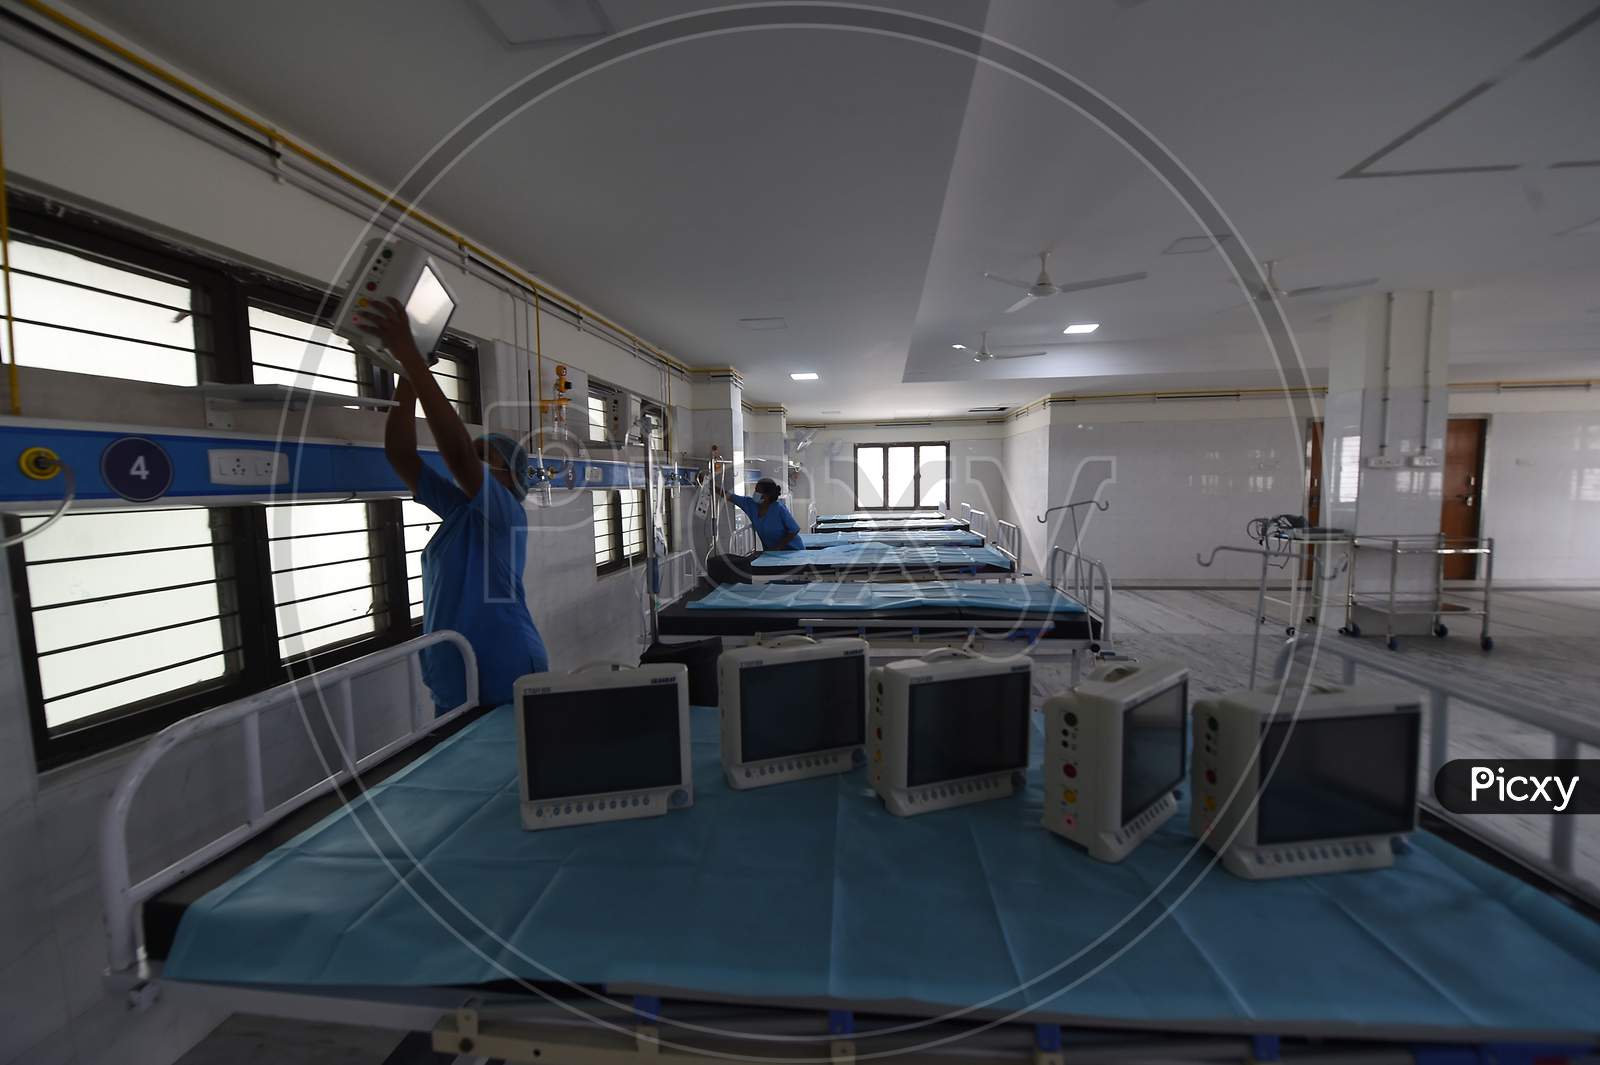 Health care workers arrange medical equipment in a building which belonged to the National Institute of Ageing that has been converted into a dedicated Covid-19 Care Centre in Chennai, Tamil Nadu on July 07, 2020